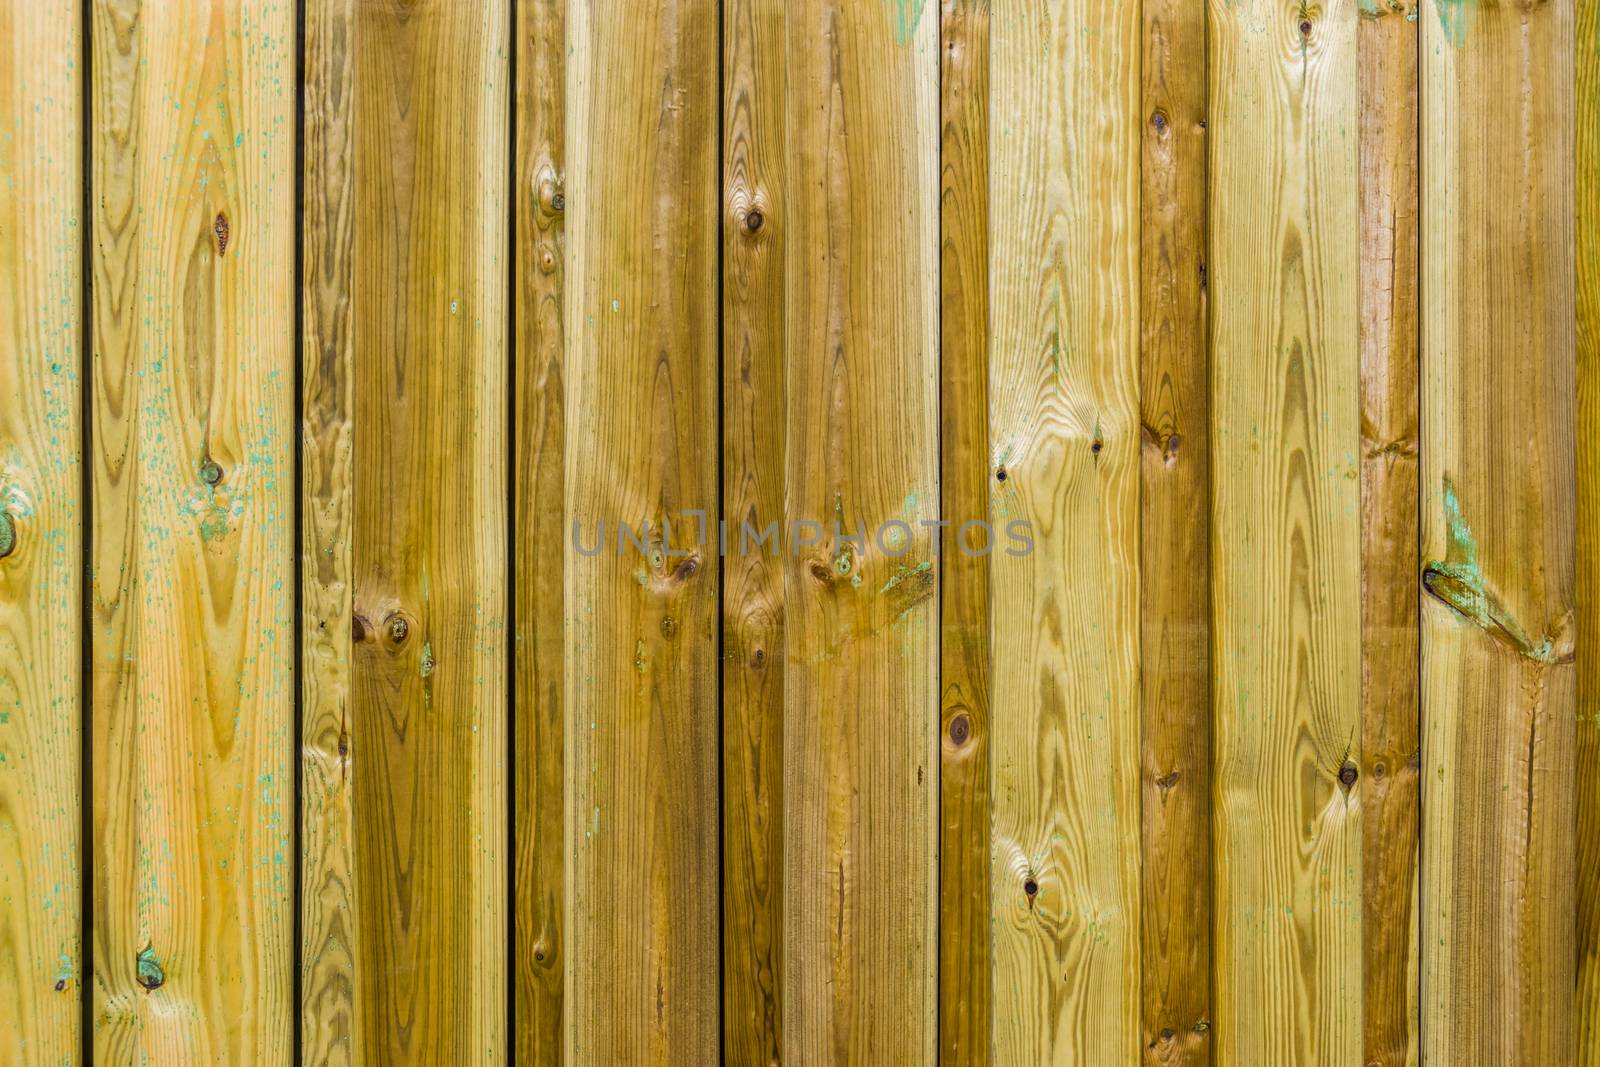 wooden palisade pattern with green mold, wood problems, Garden fence background by charlottebleijenberg